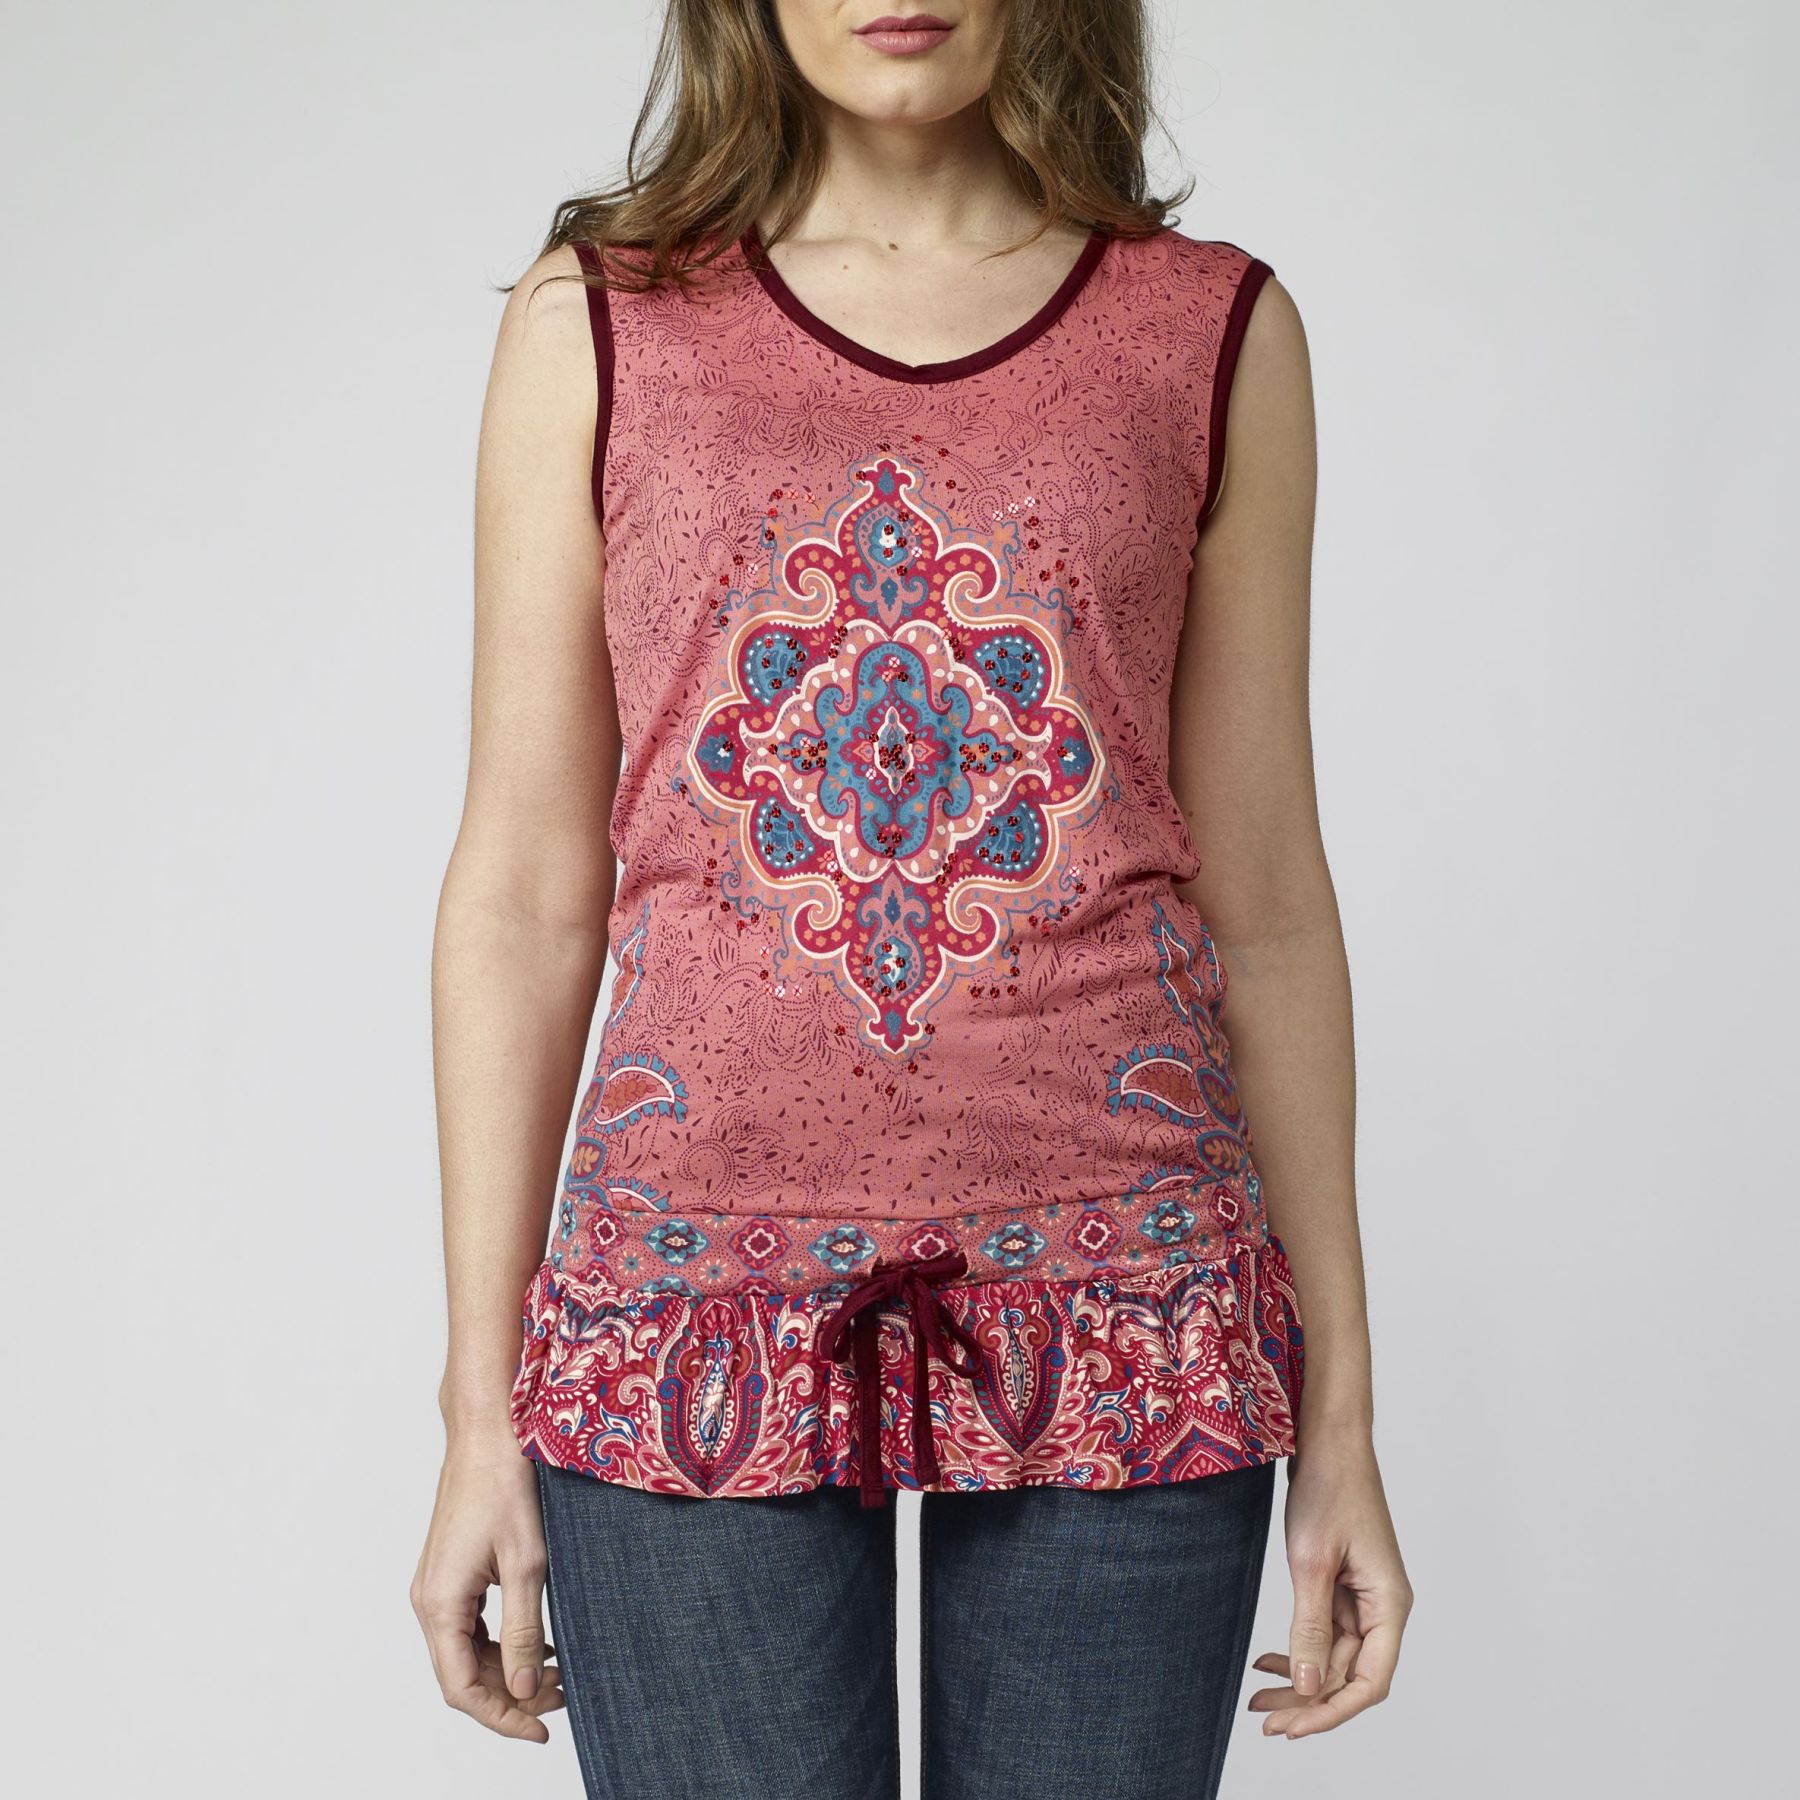 Coral Color Ethnic Print Tank Top for Women 2